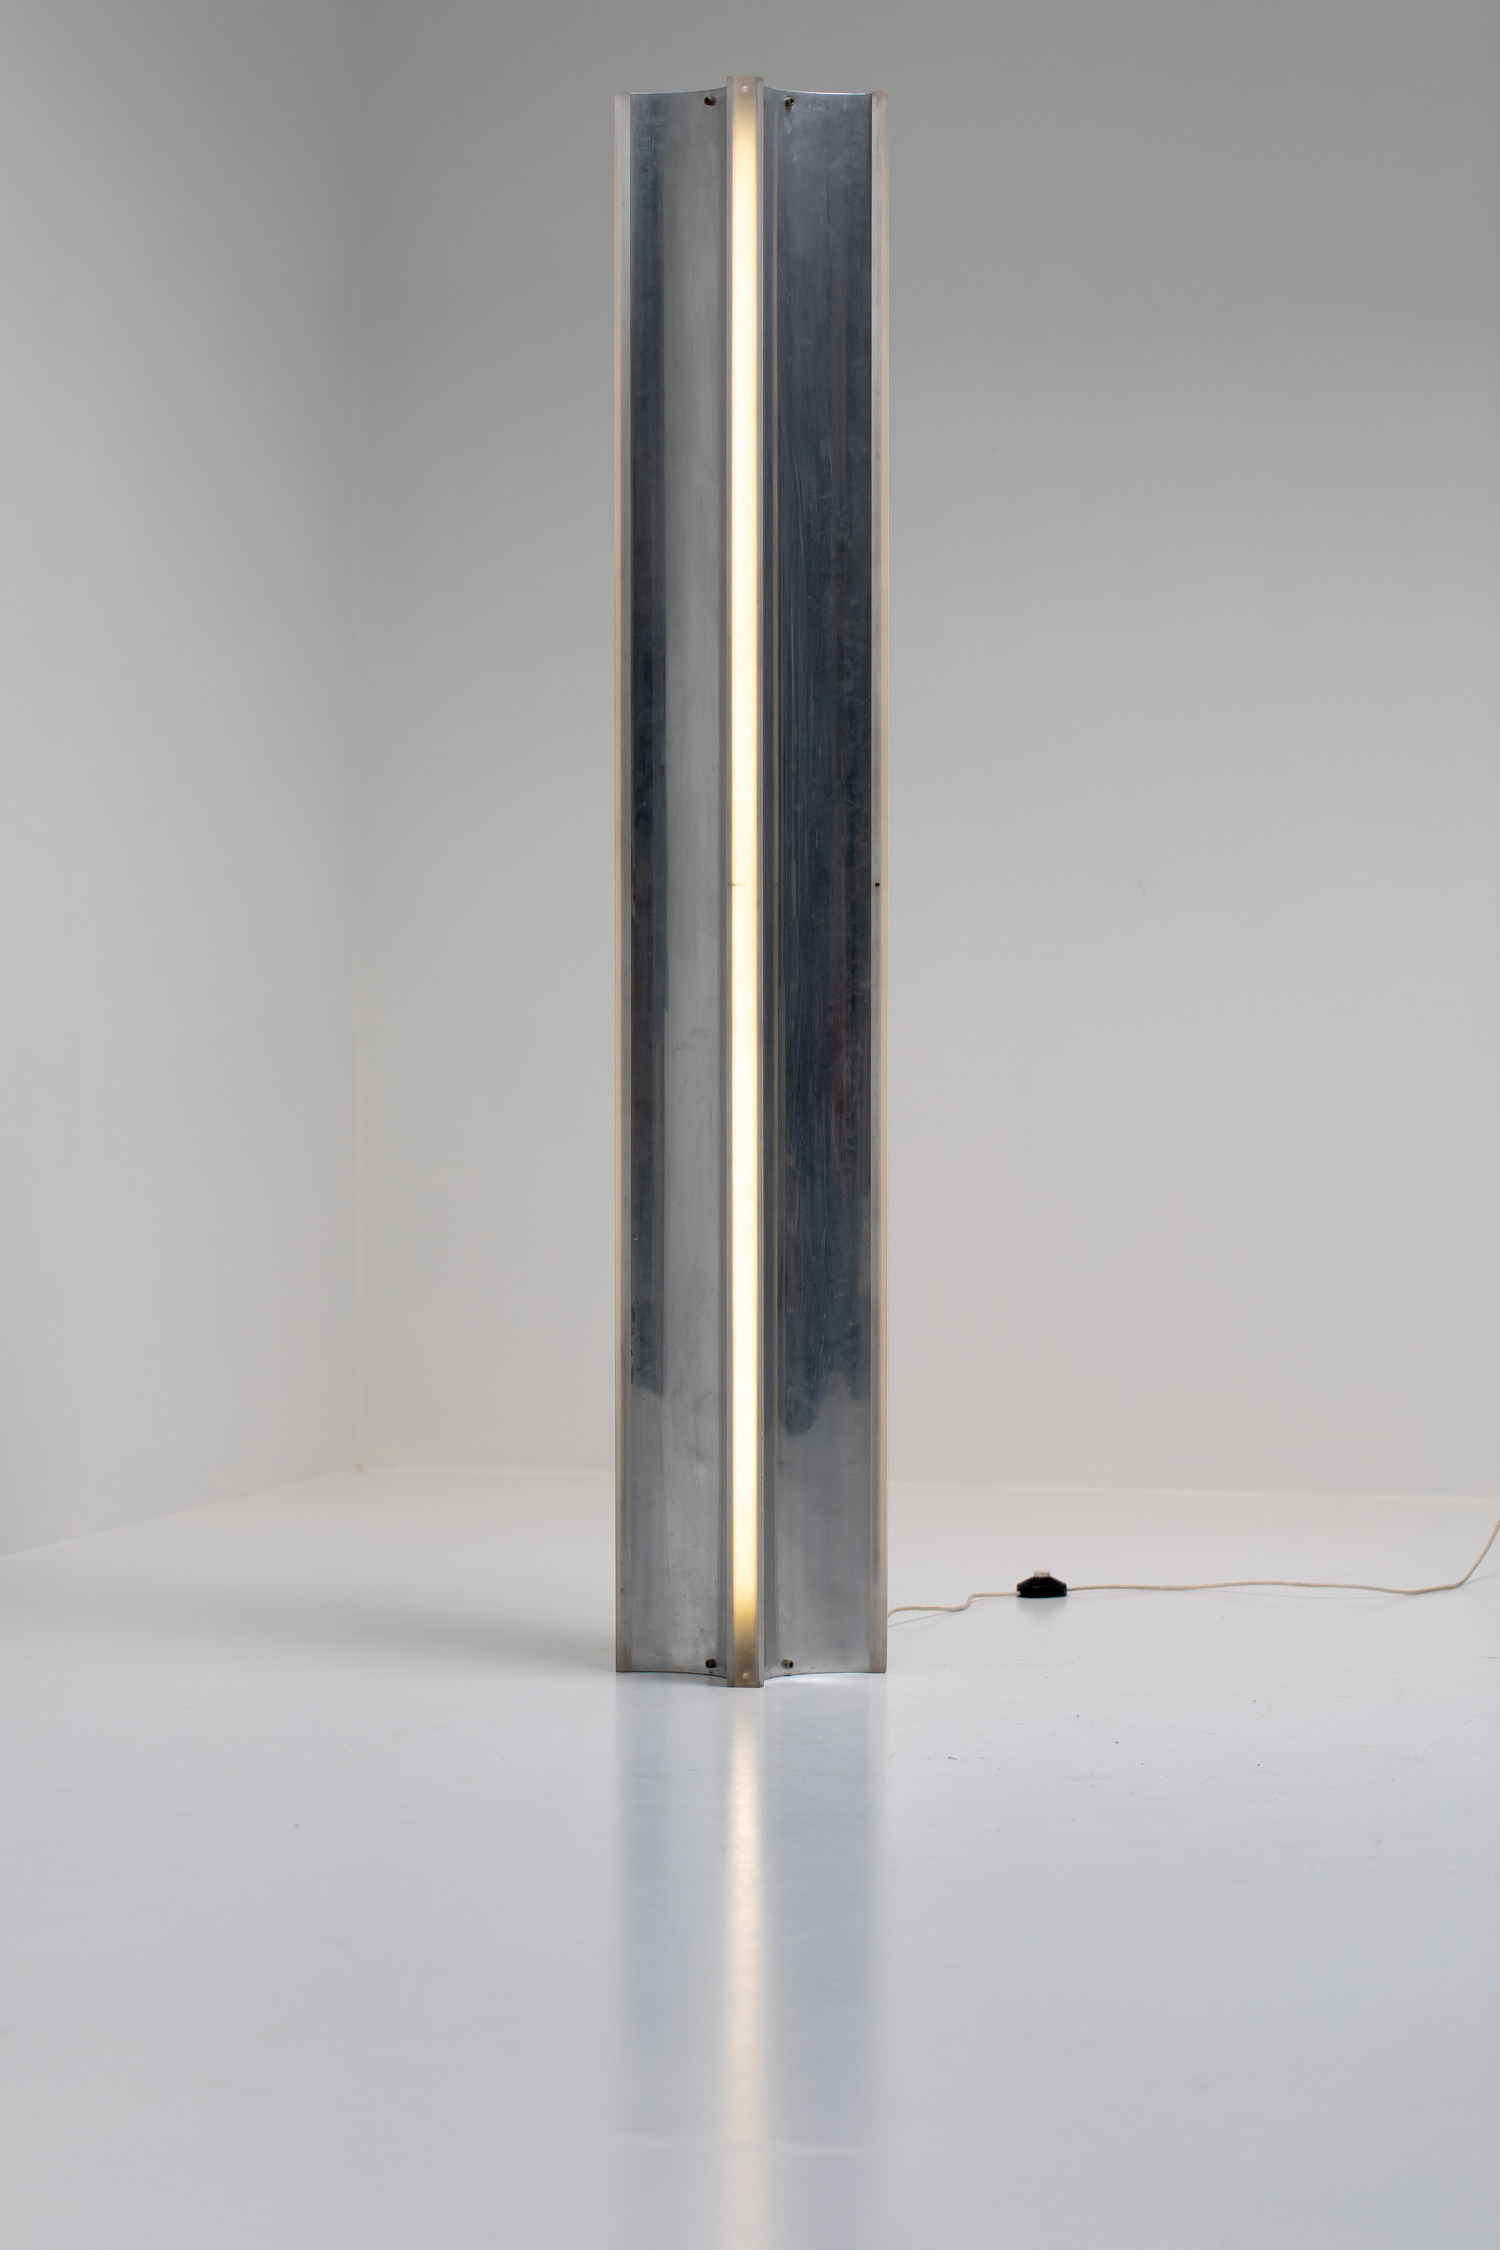 Azimuth floor lamp by Fabrizio Cocchia and Gianfranco Fini for New Lamp